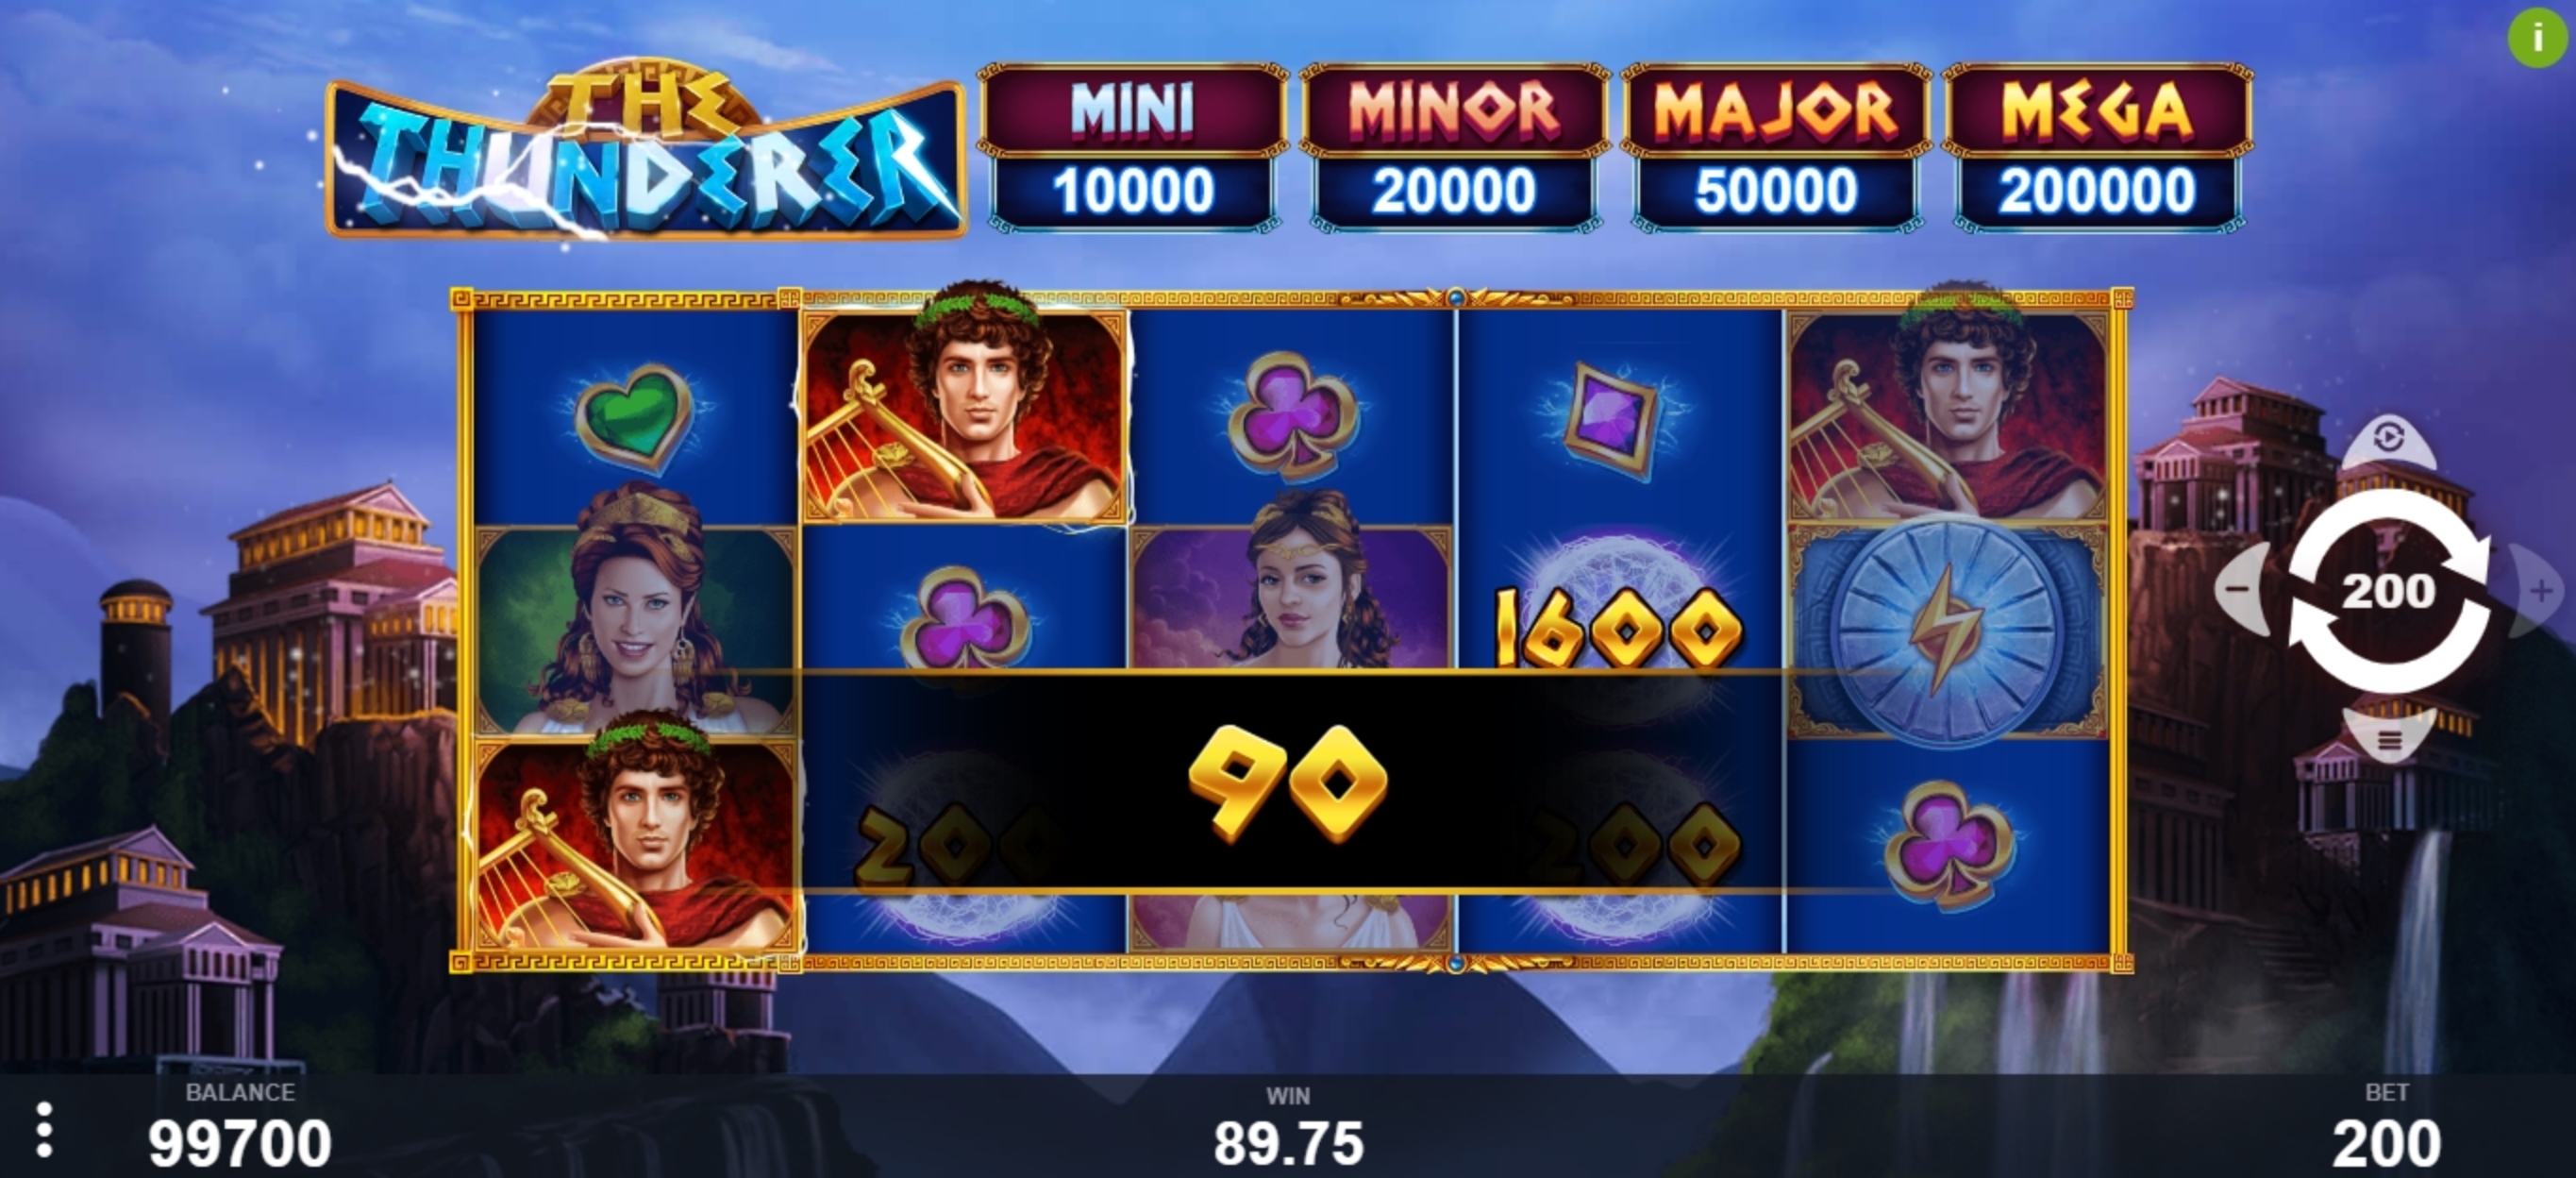 Win Money in The Thunderer Free Slot Game by PariPlay